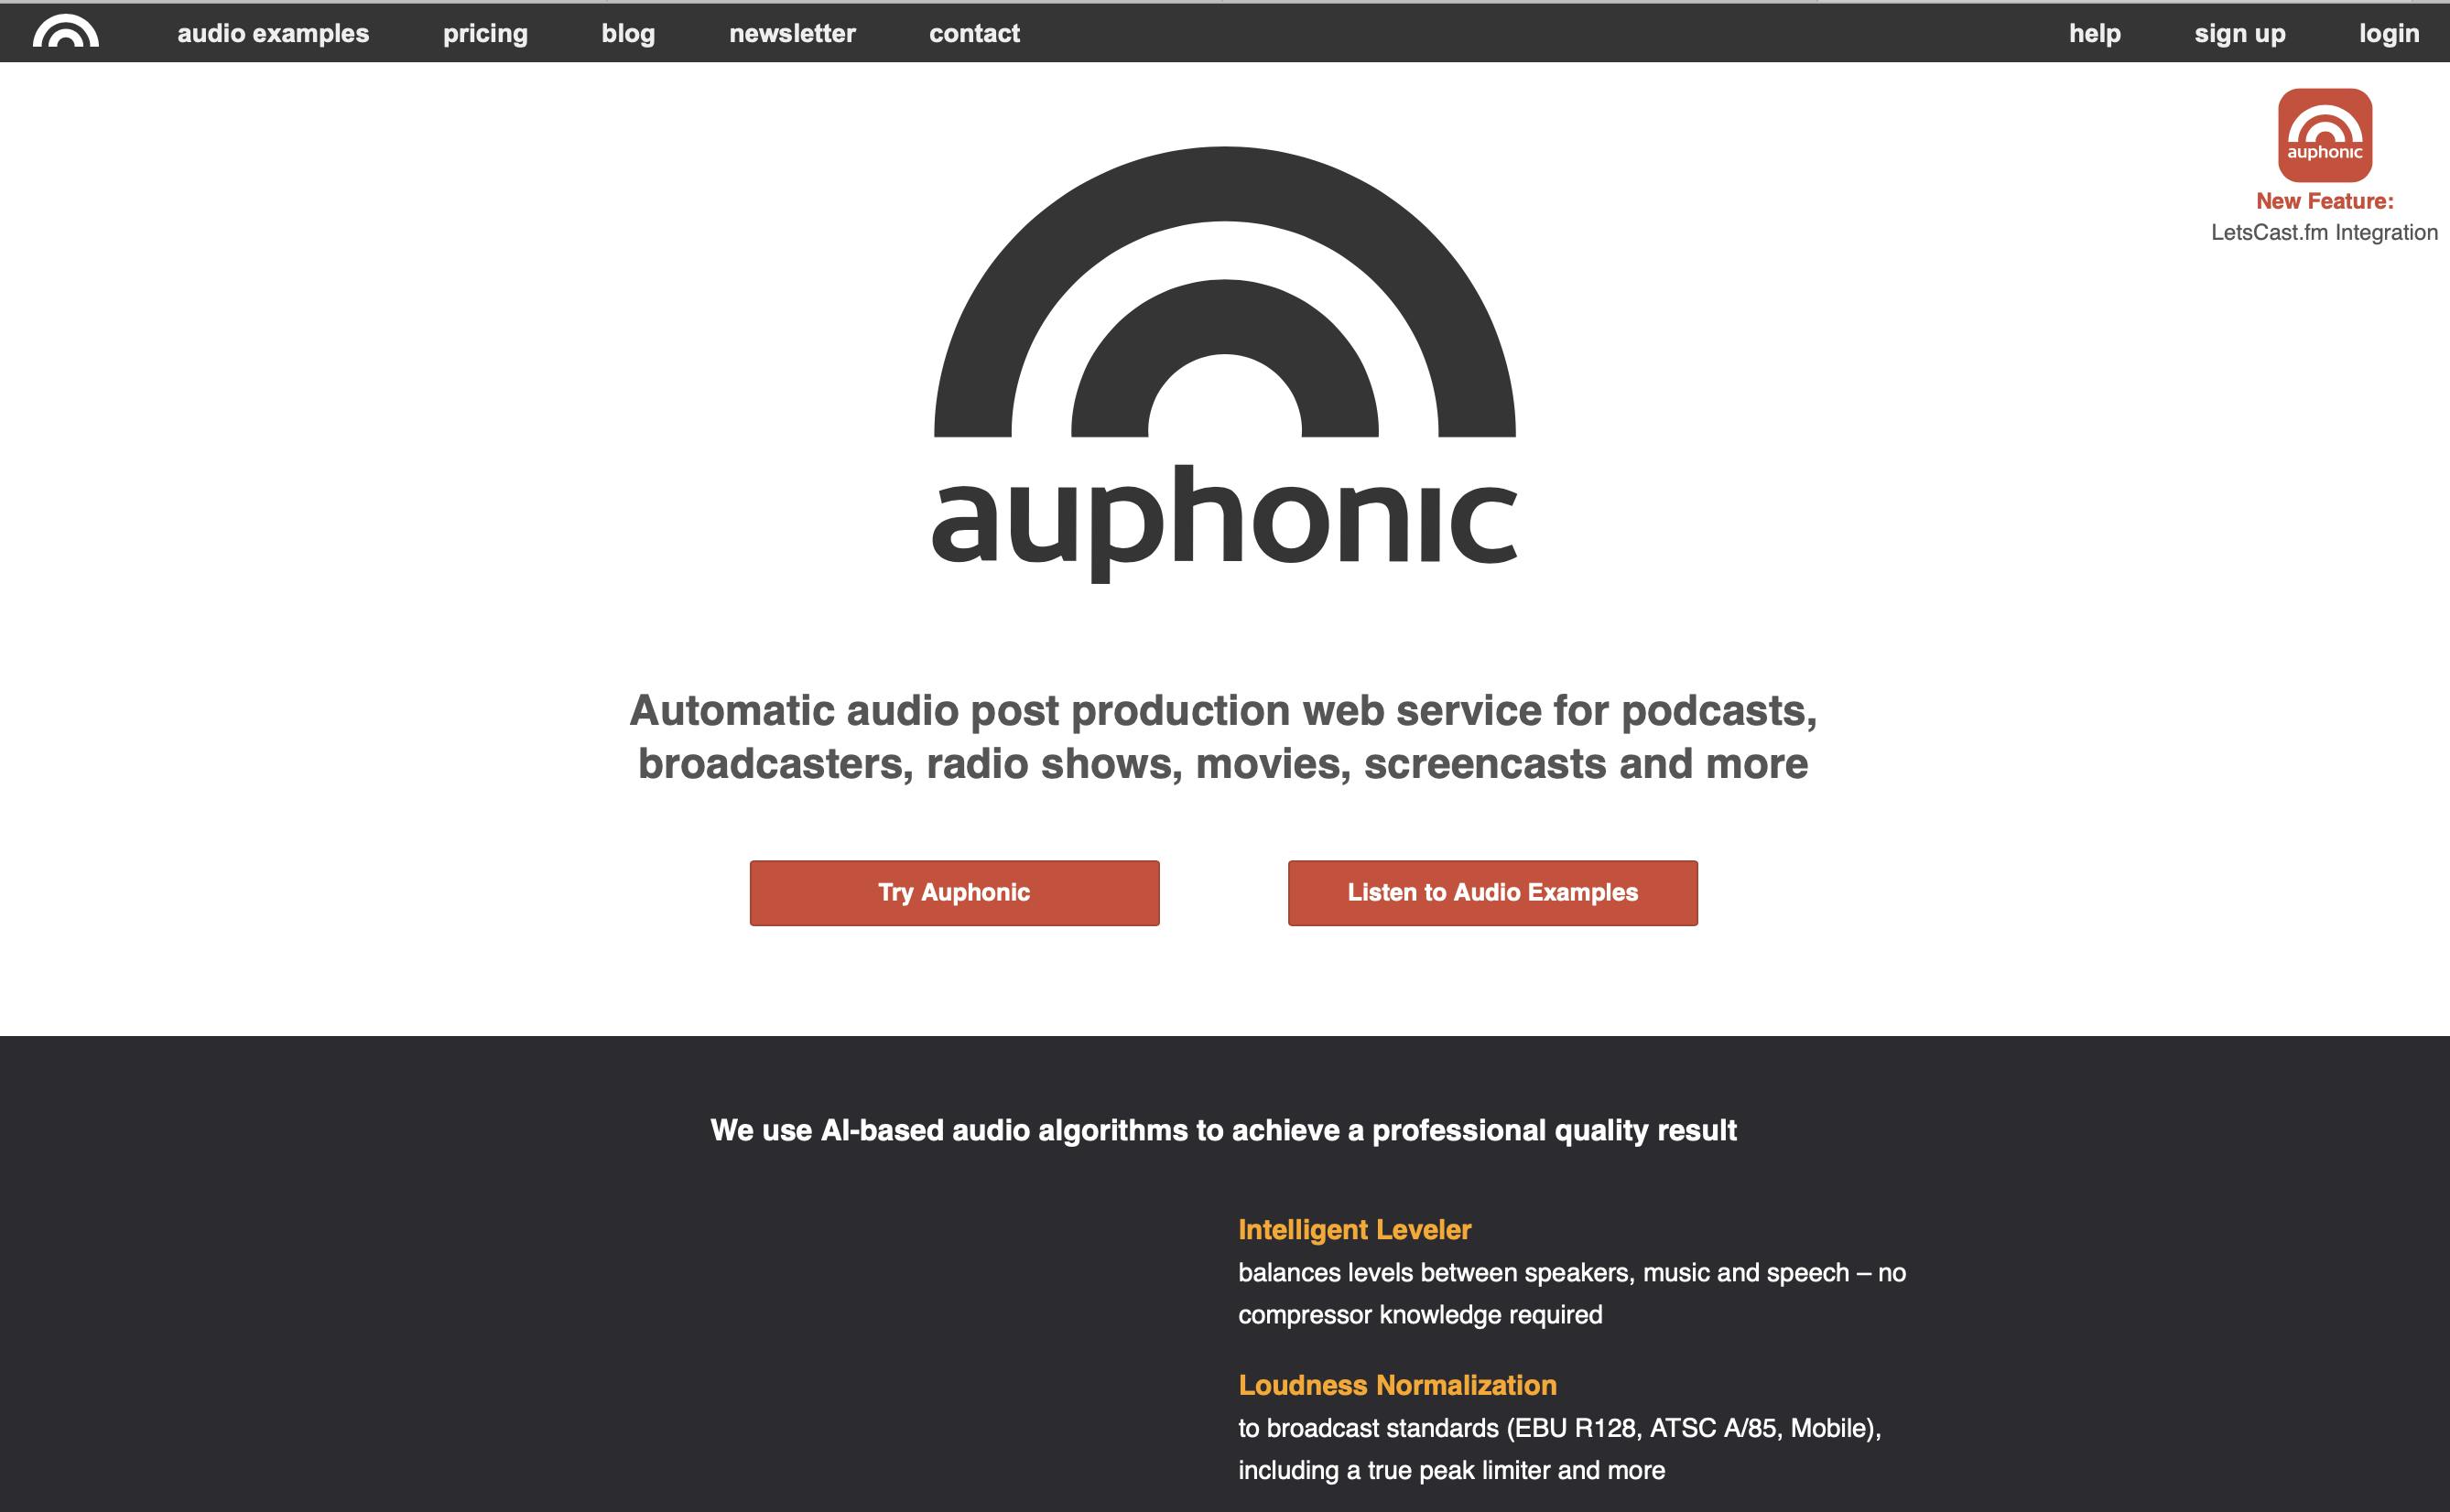 Auphonic homepage with black and white design and red buttons